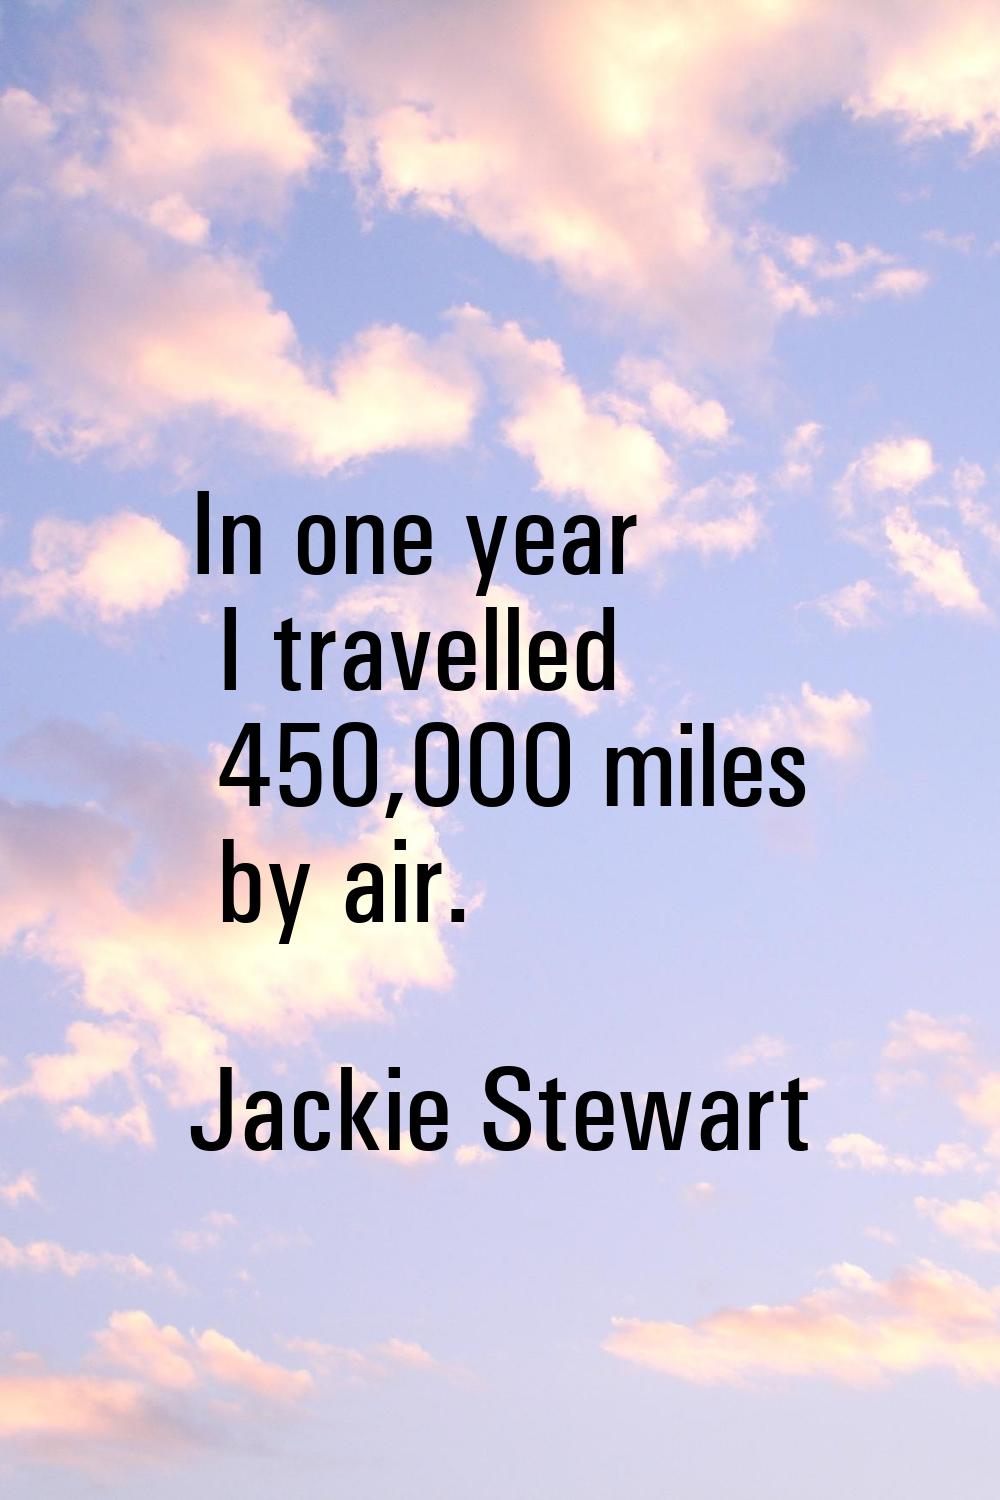 In one year I travelled 450,000 miles by air.